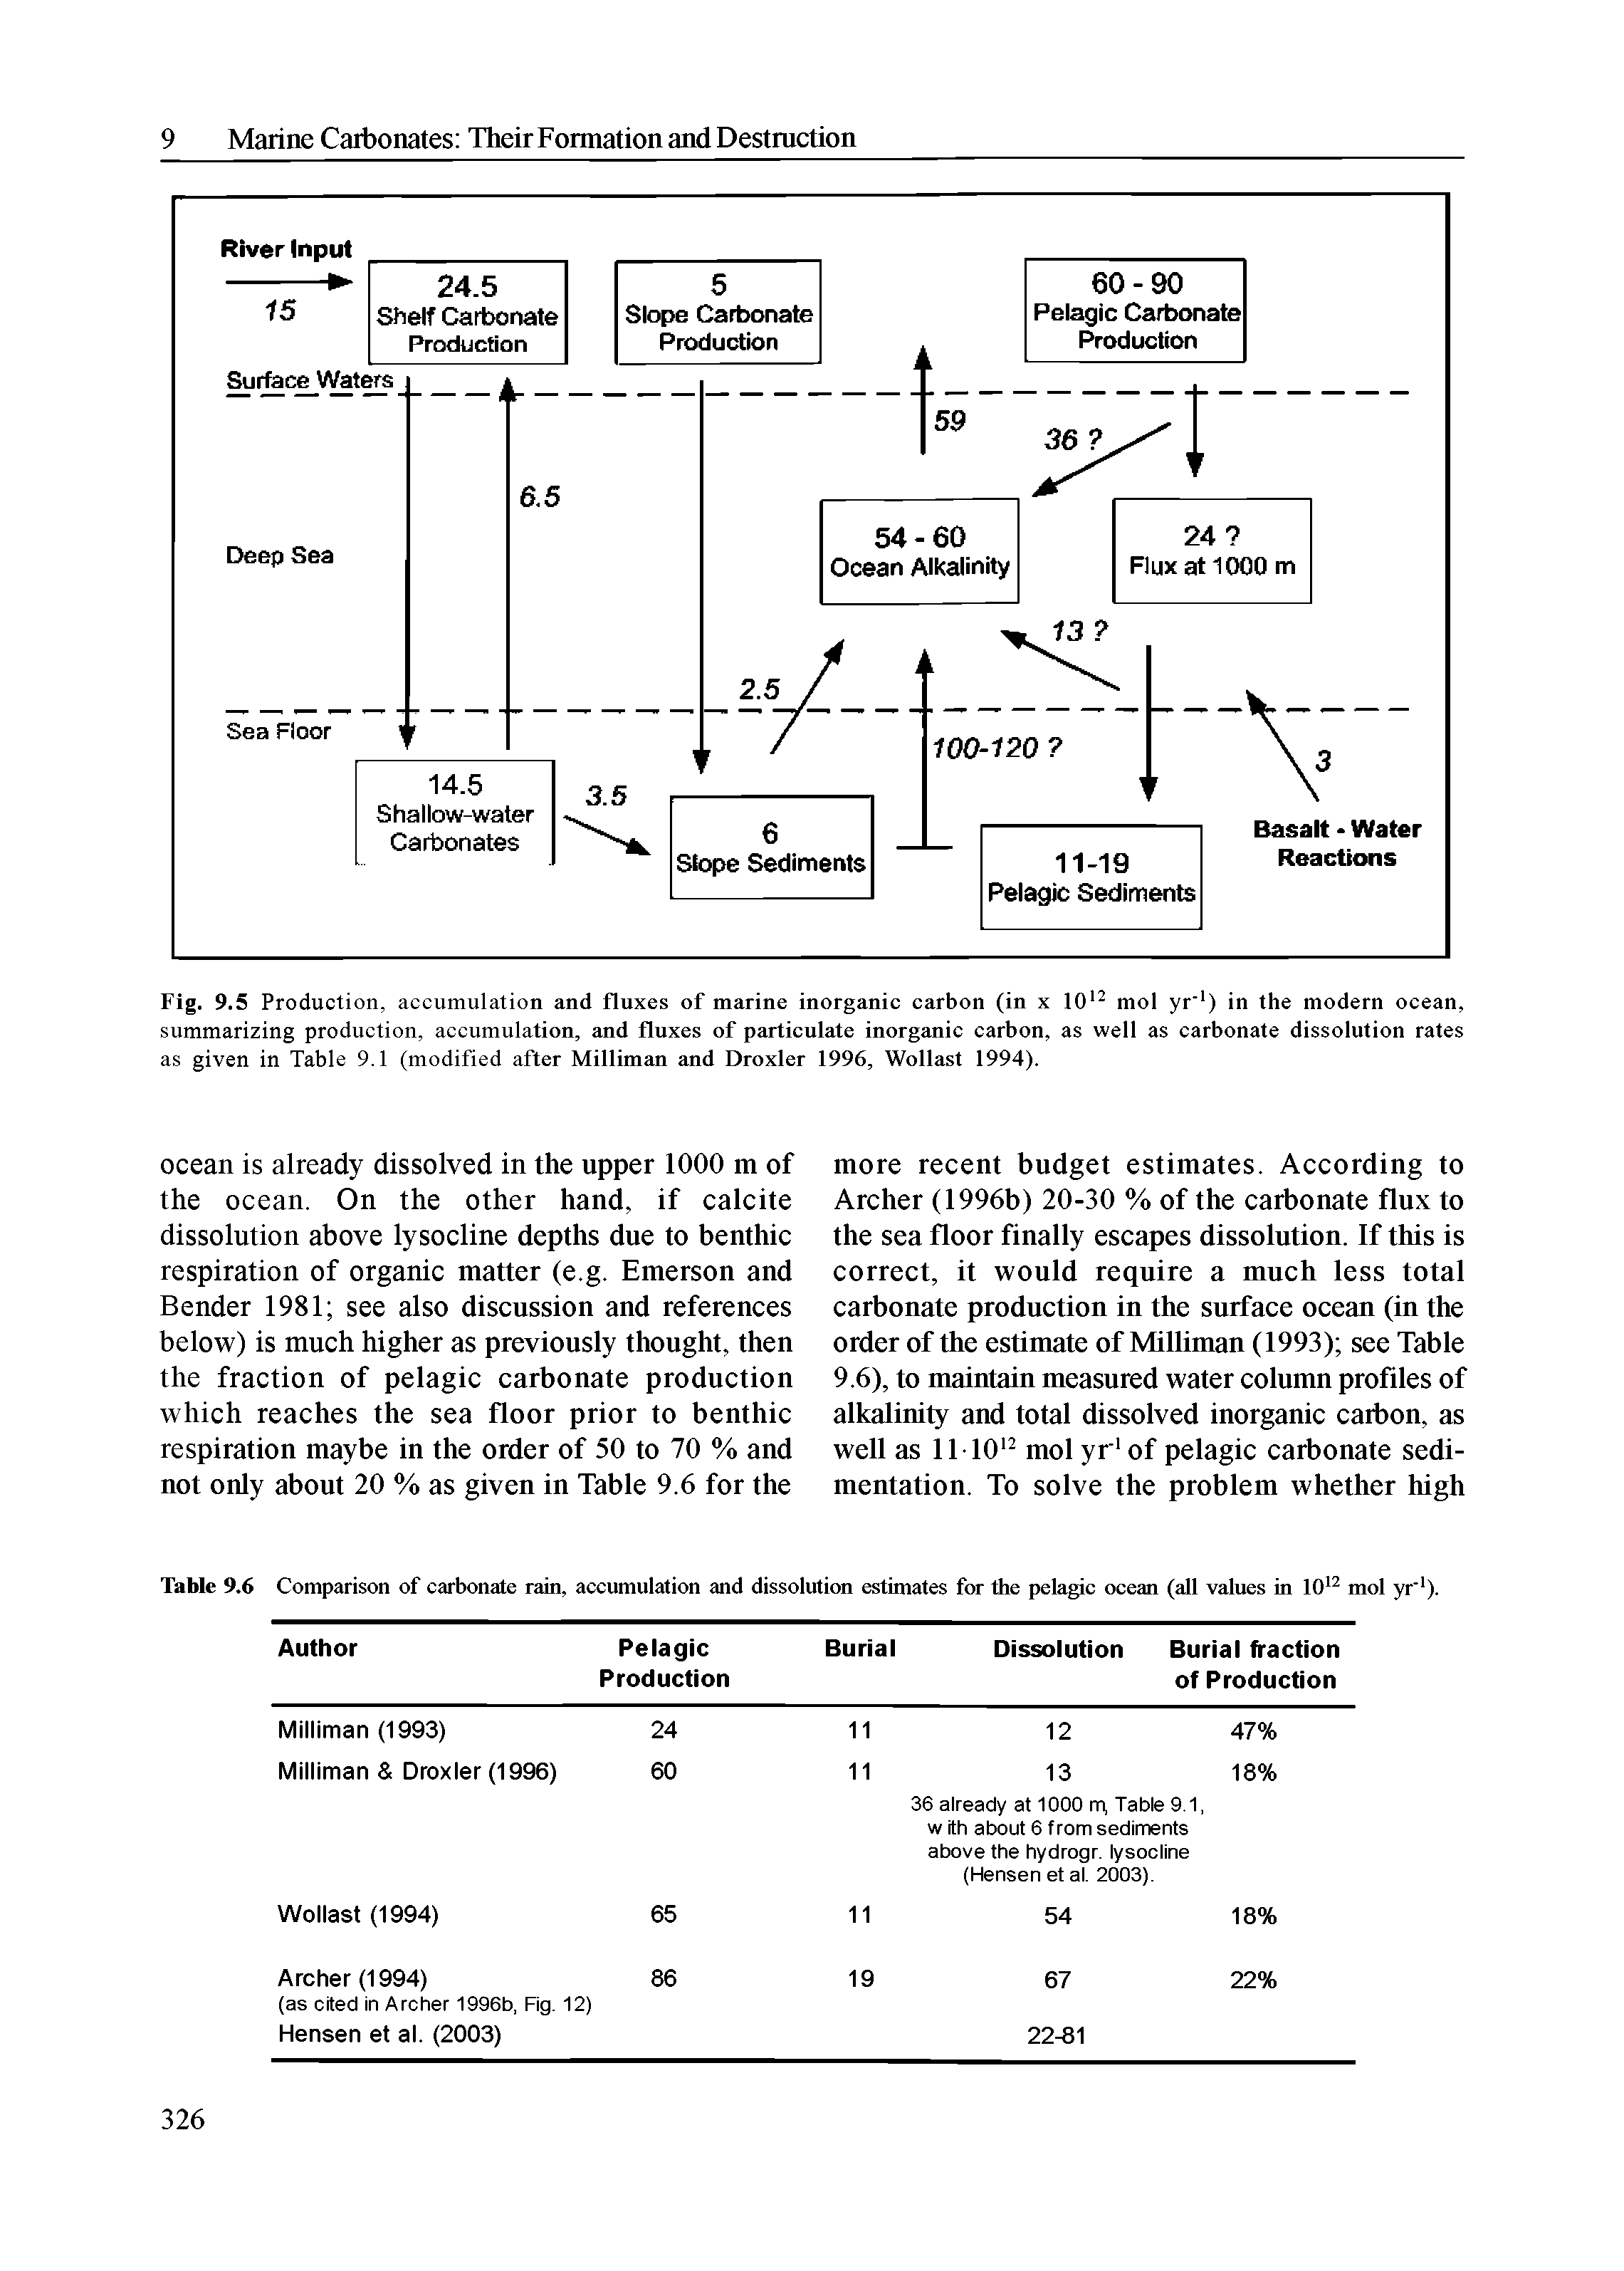 Fig. 9.5 Production, accumulation and fluxes of marine inorganic carbon (in x 10 mol yr" ) in the modern ocean, summarizing production, accumulation, and fluxes of particulate inorganic carbon, as well as carbonate dissolution rates as given in Table 9.1 (modified after Milliman and Droxler 1996, Wollast 1994).